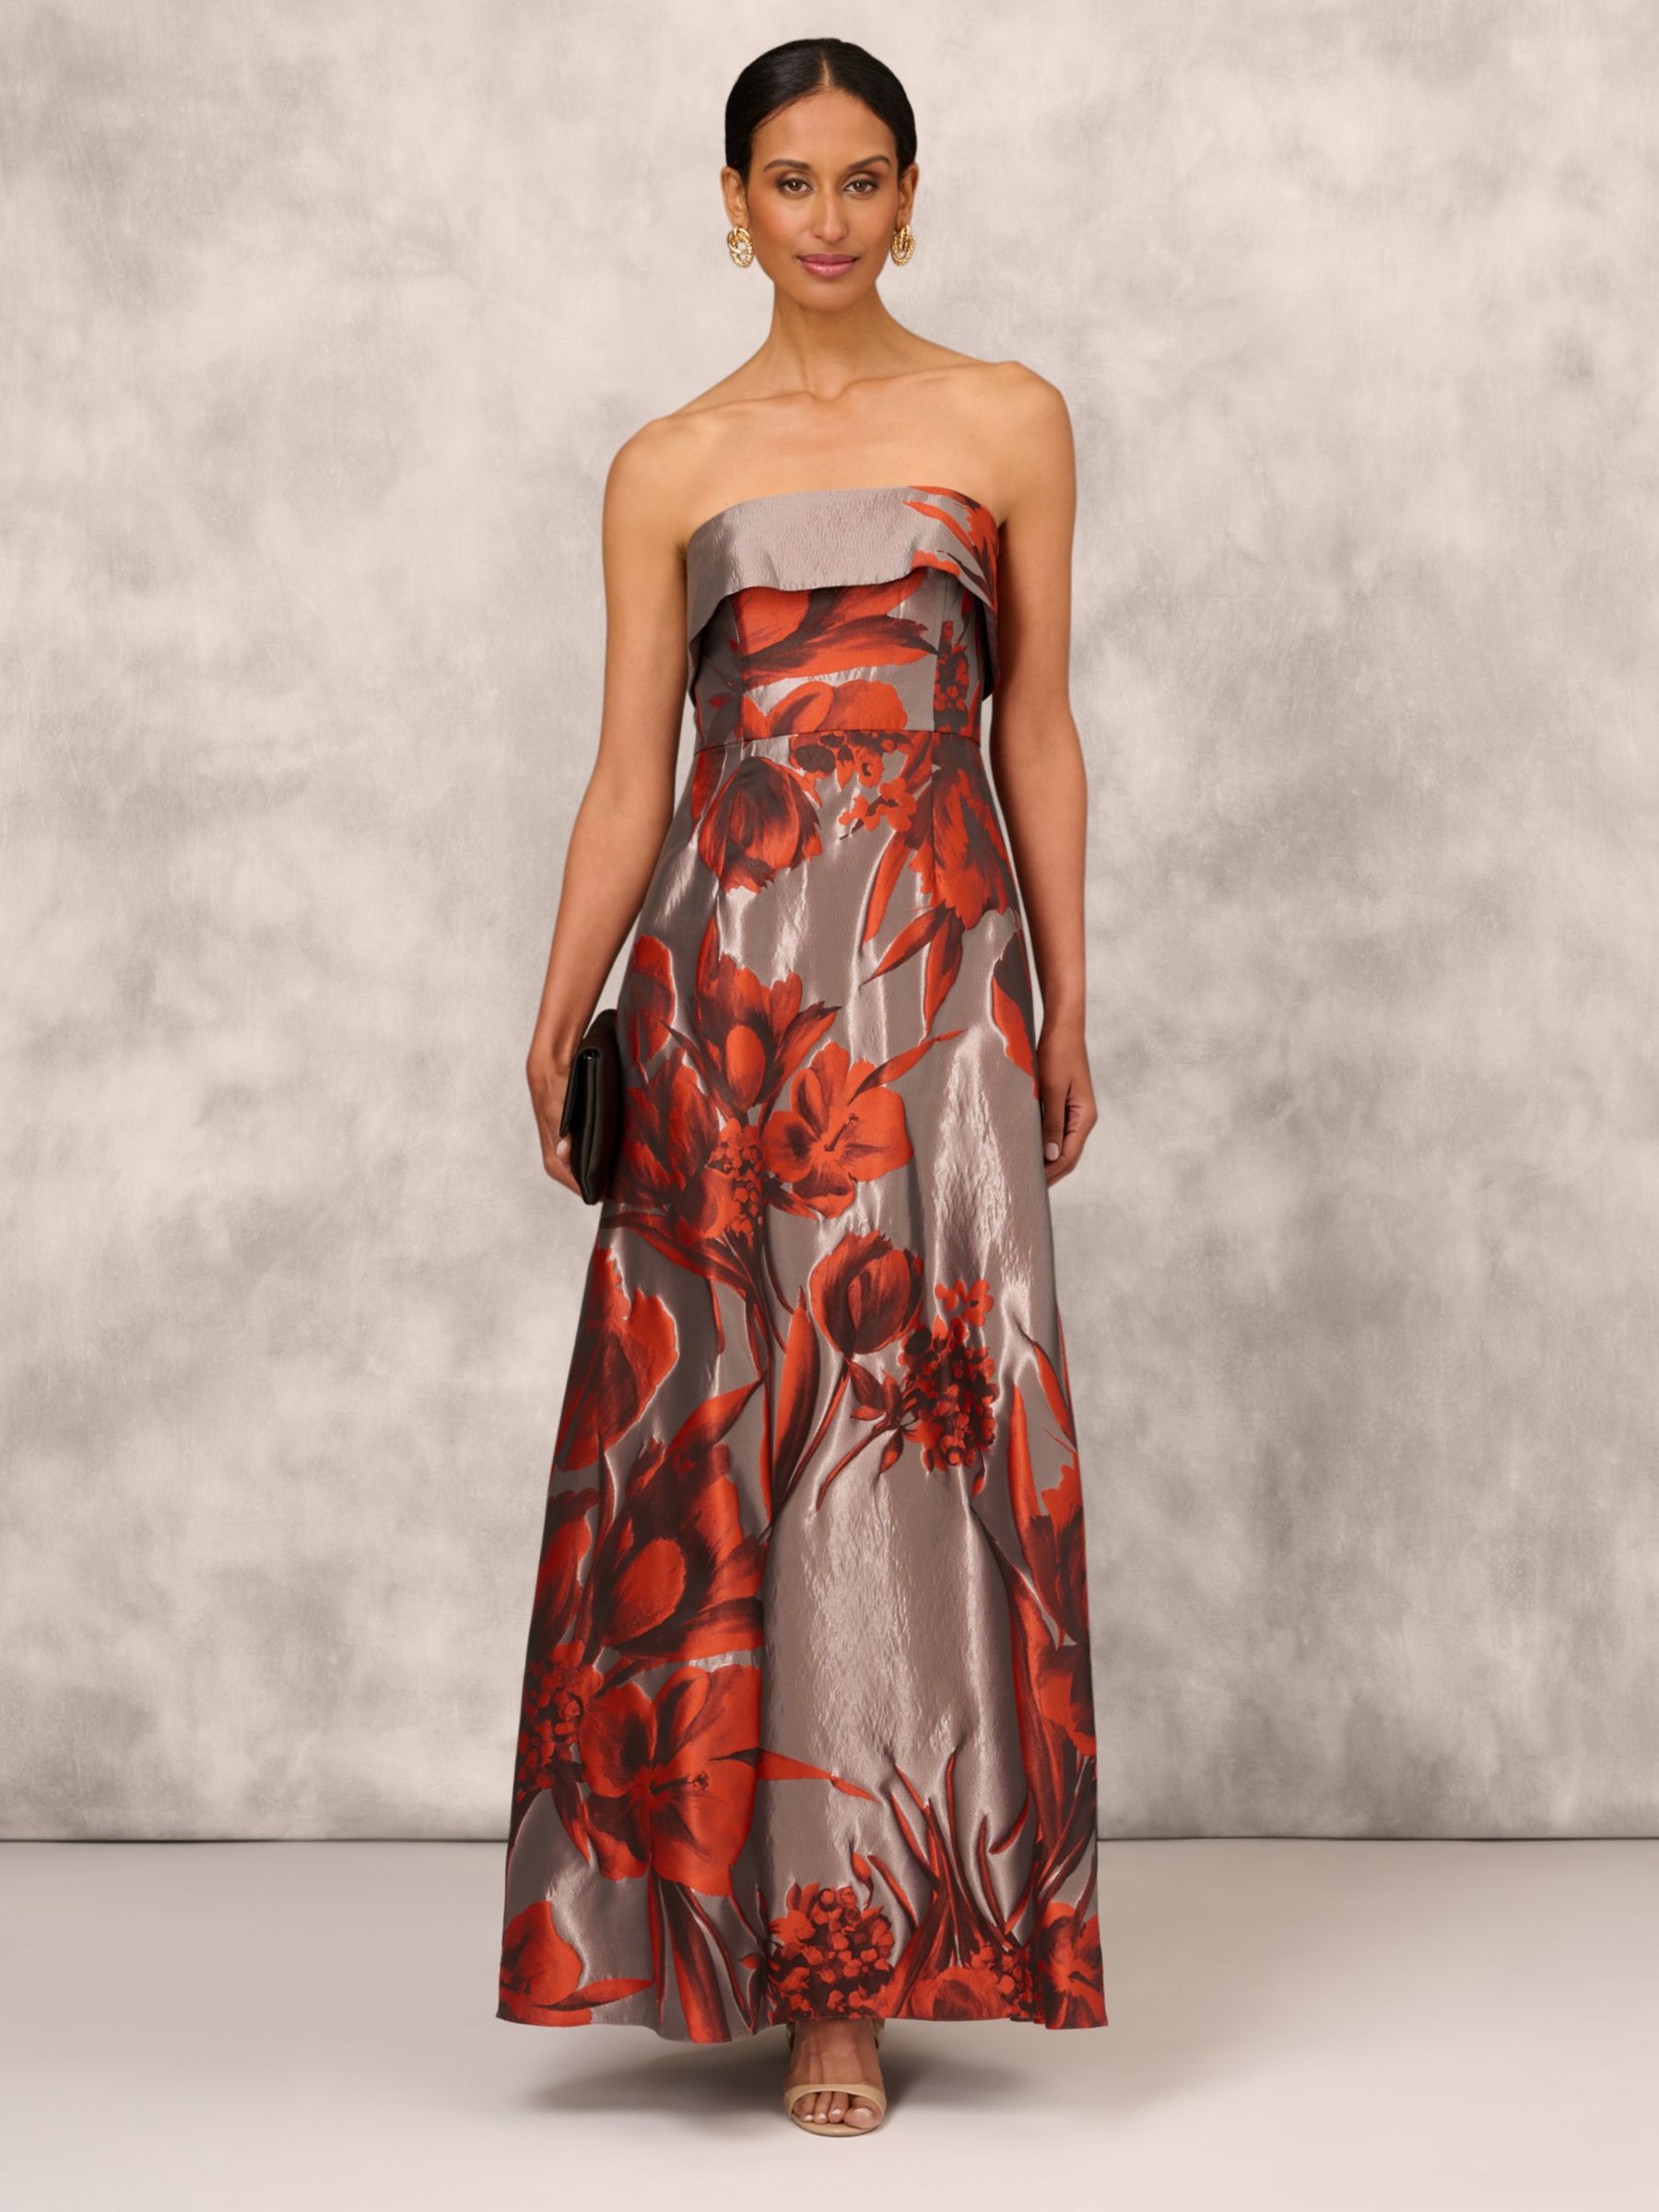 Buy Aidan Mattox by Adrianna Papell Strapless Floral Jacquard Maxi Dress, Rust/Multi Online at johnlewis.com